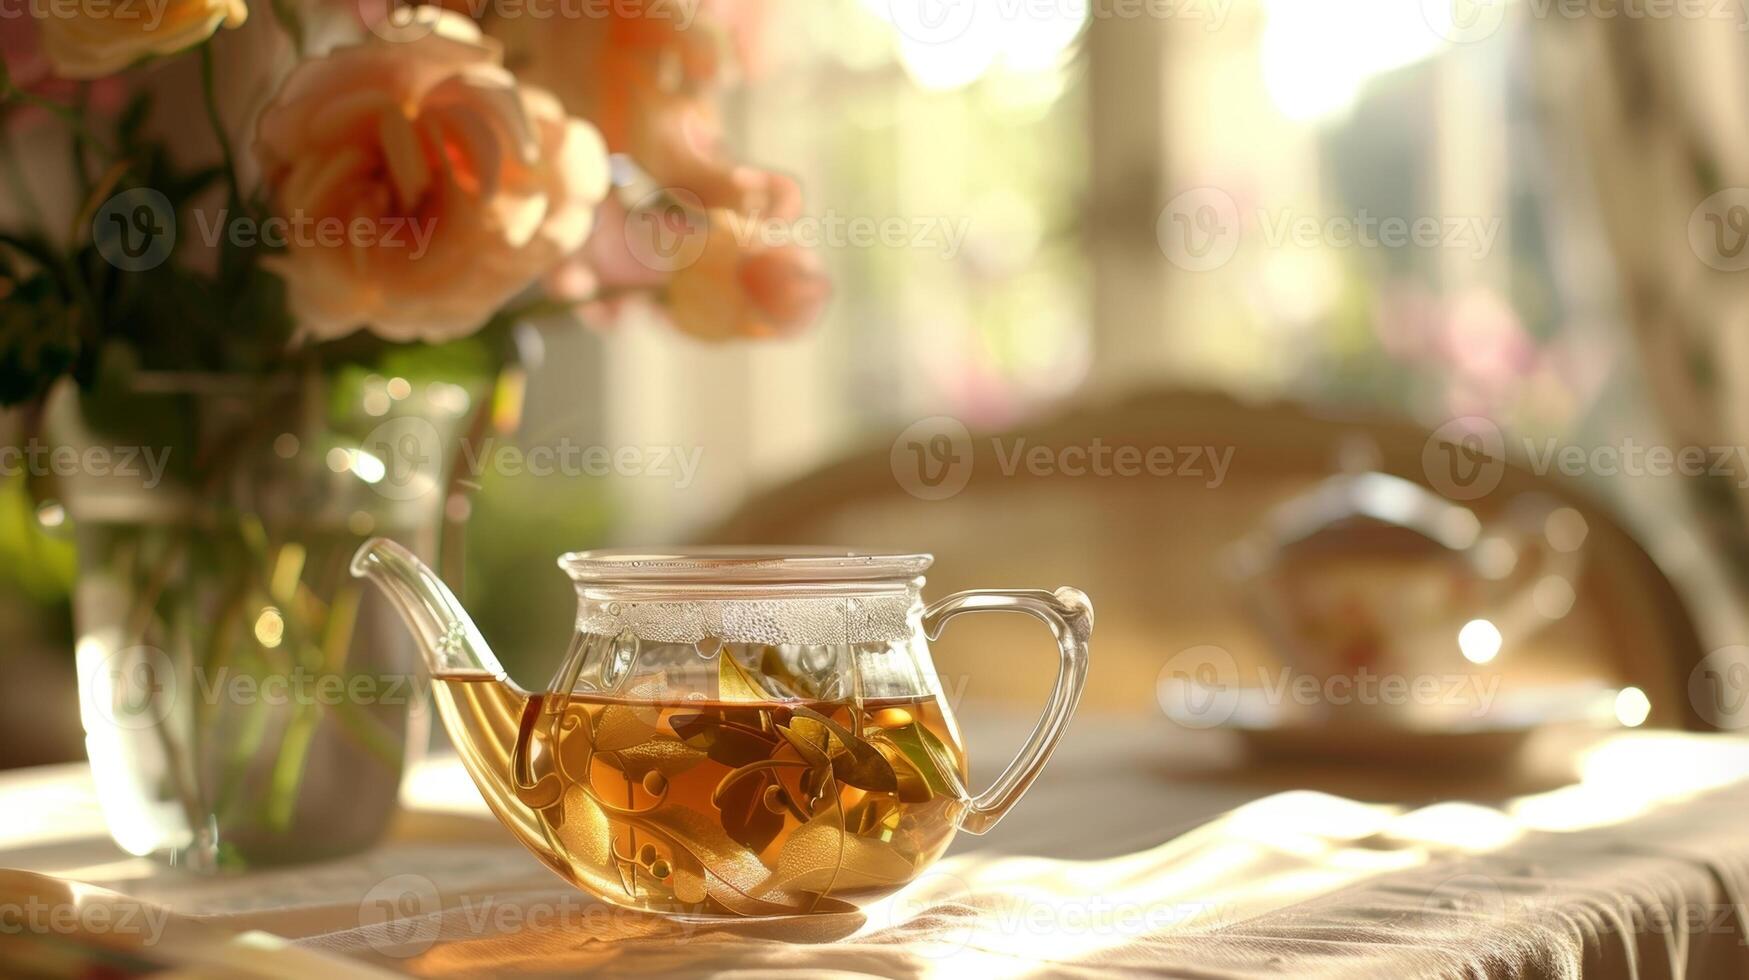 The room is filled with the soothing scent of tea and the soft chatter of teens enjoying each others company in a relaxed yet elegant atmosphere photo